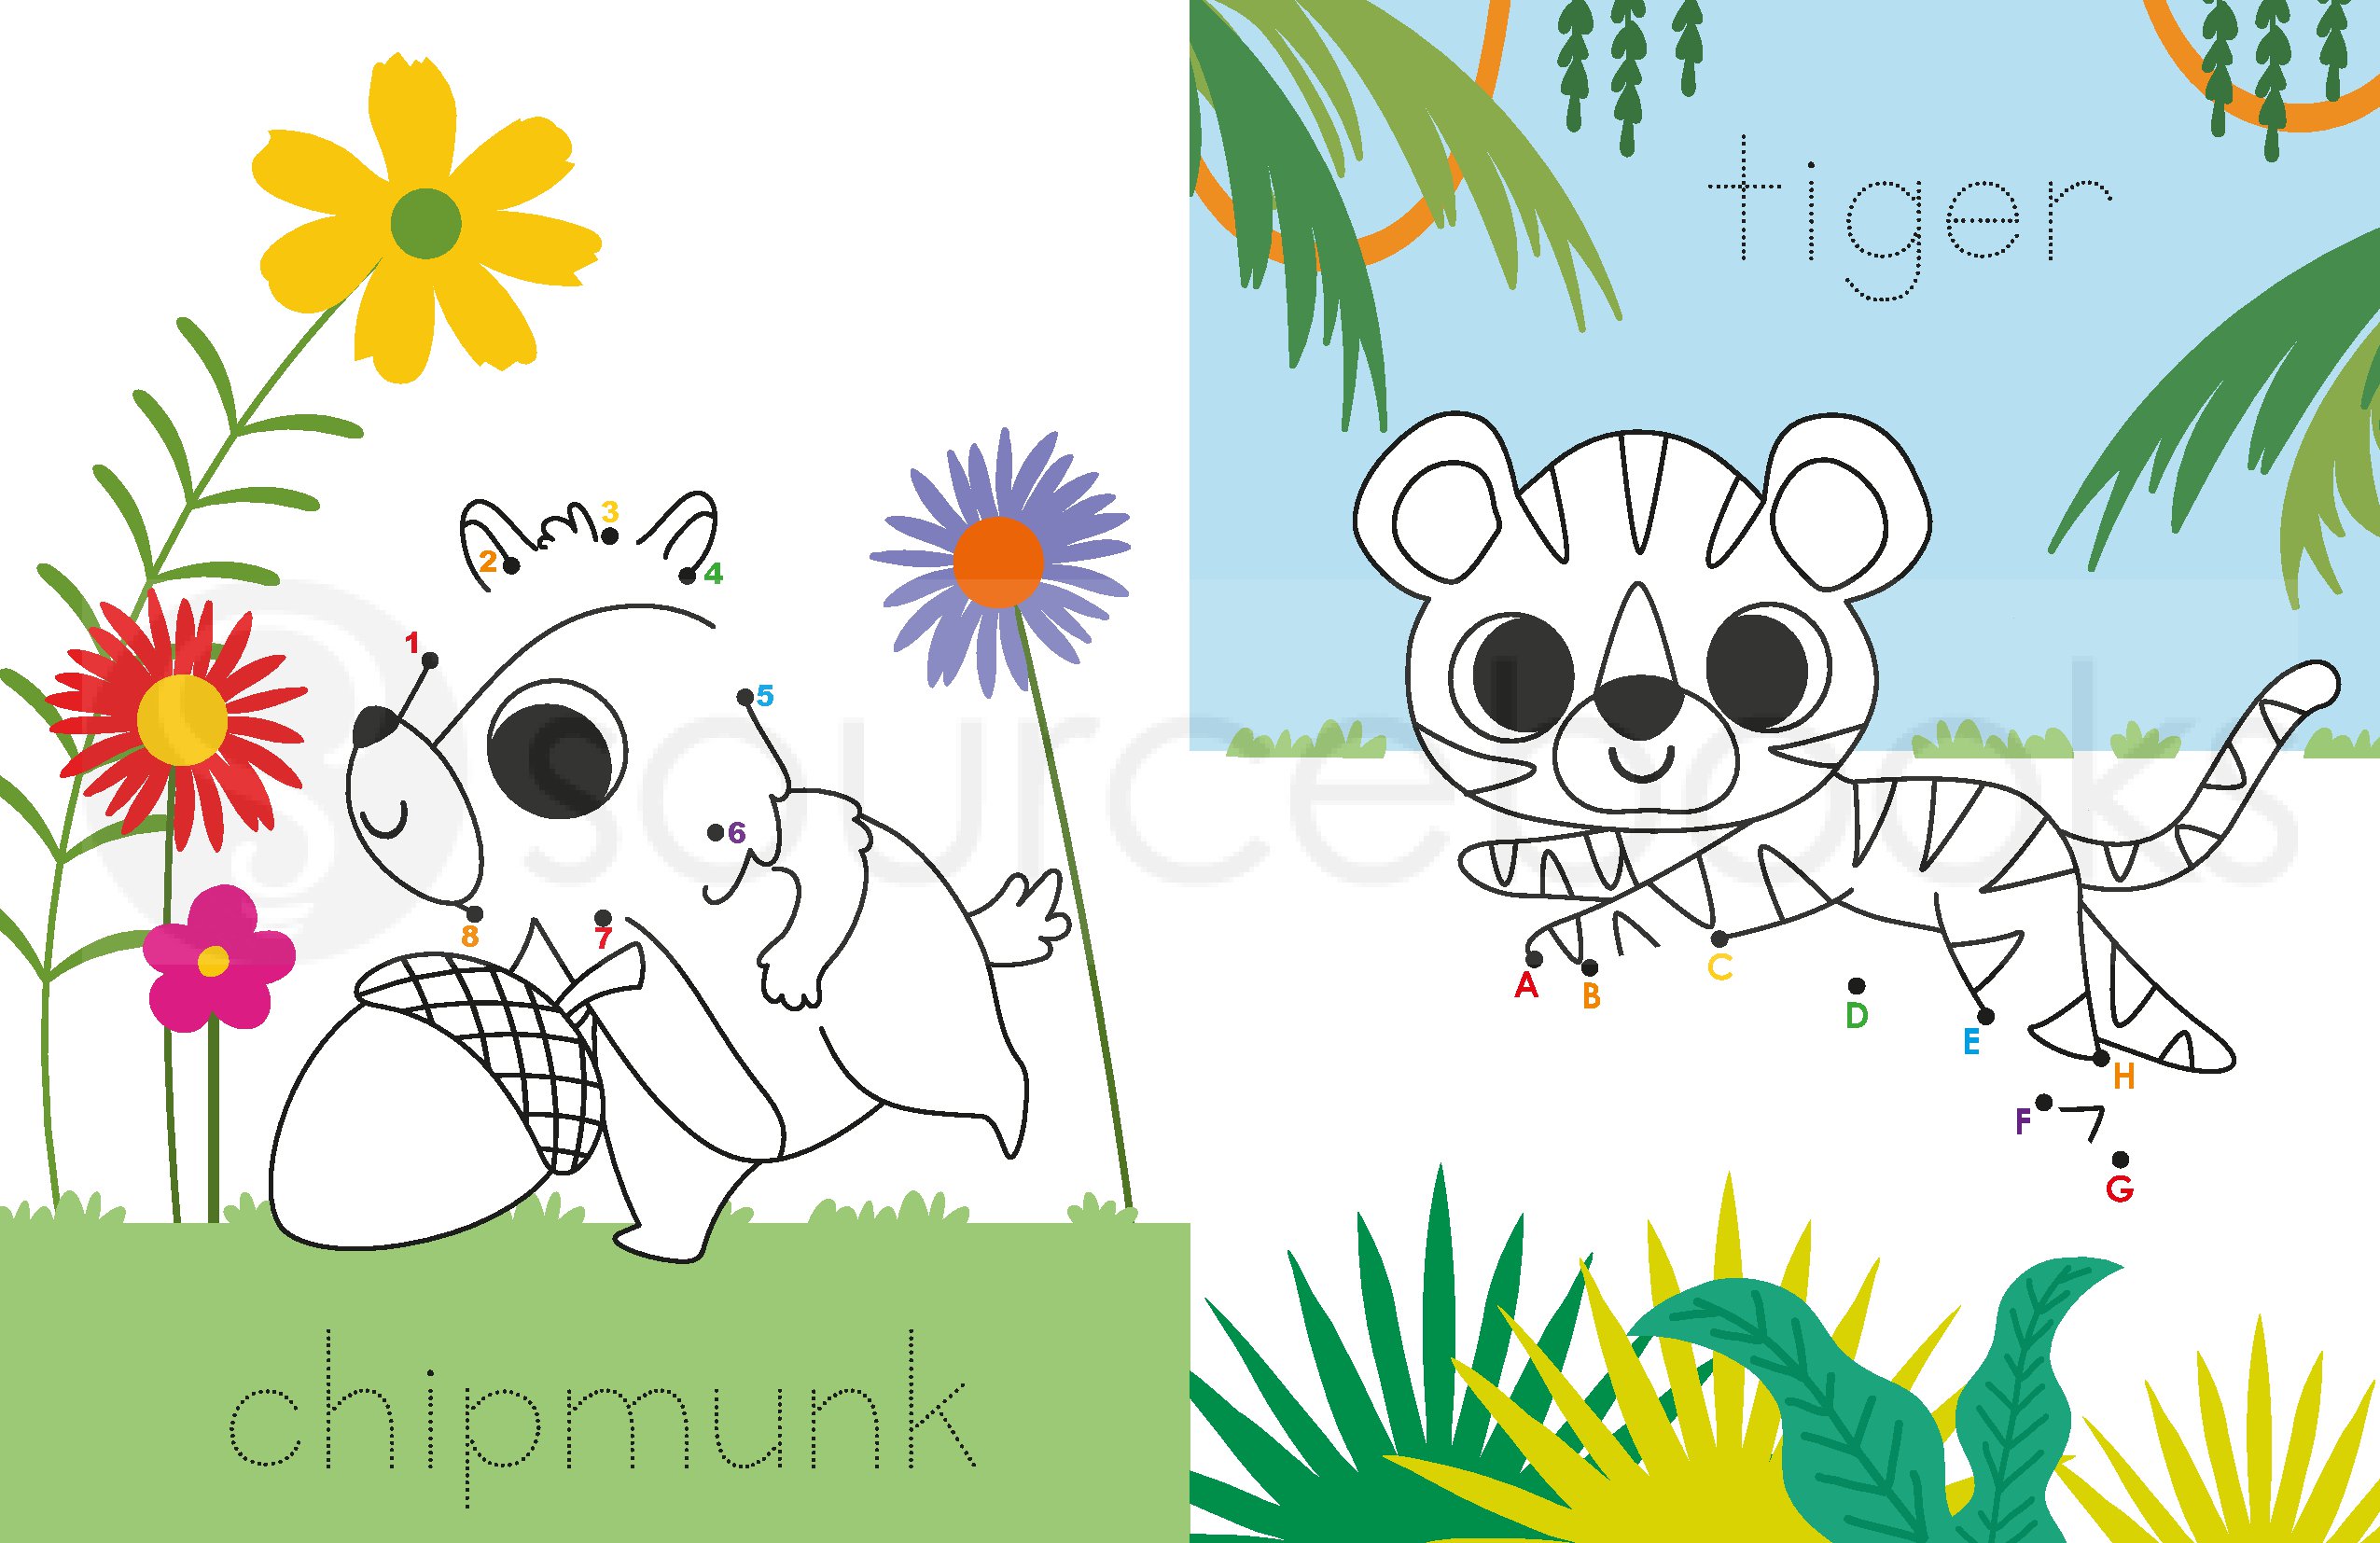 My First Dot To Dot Activity Book: Baby Animals